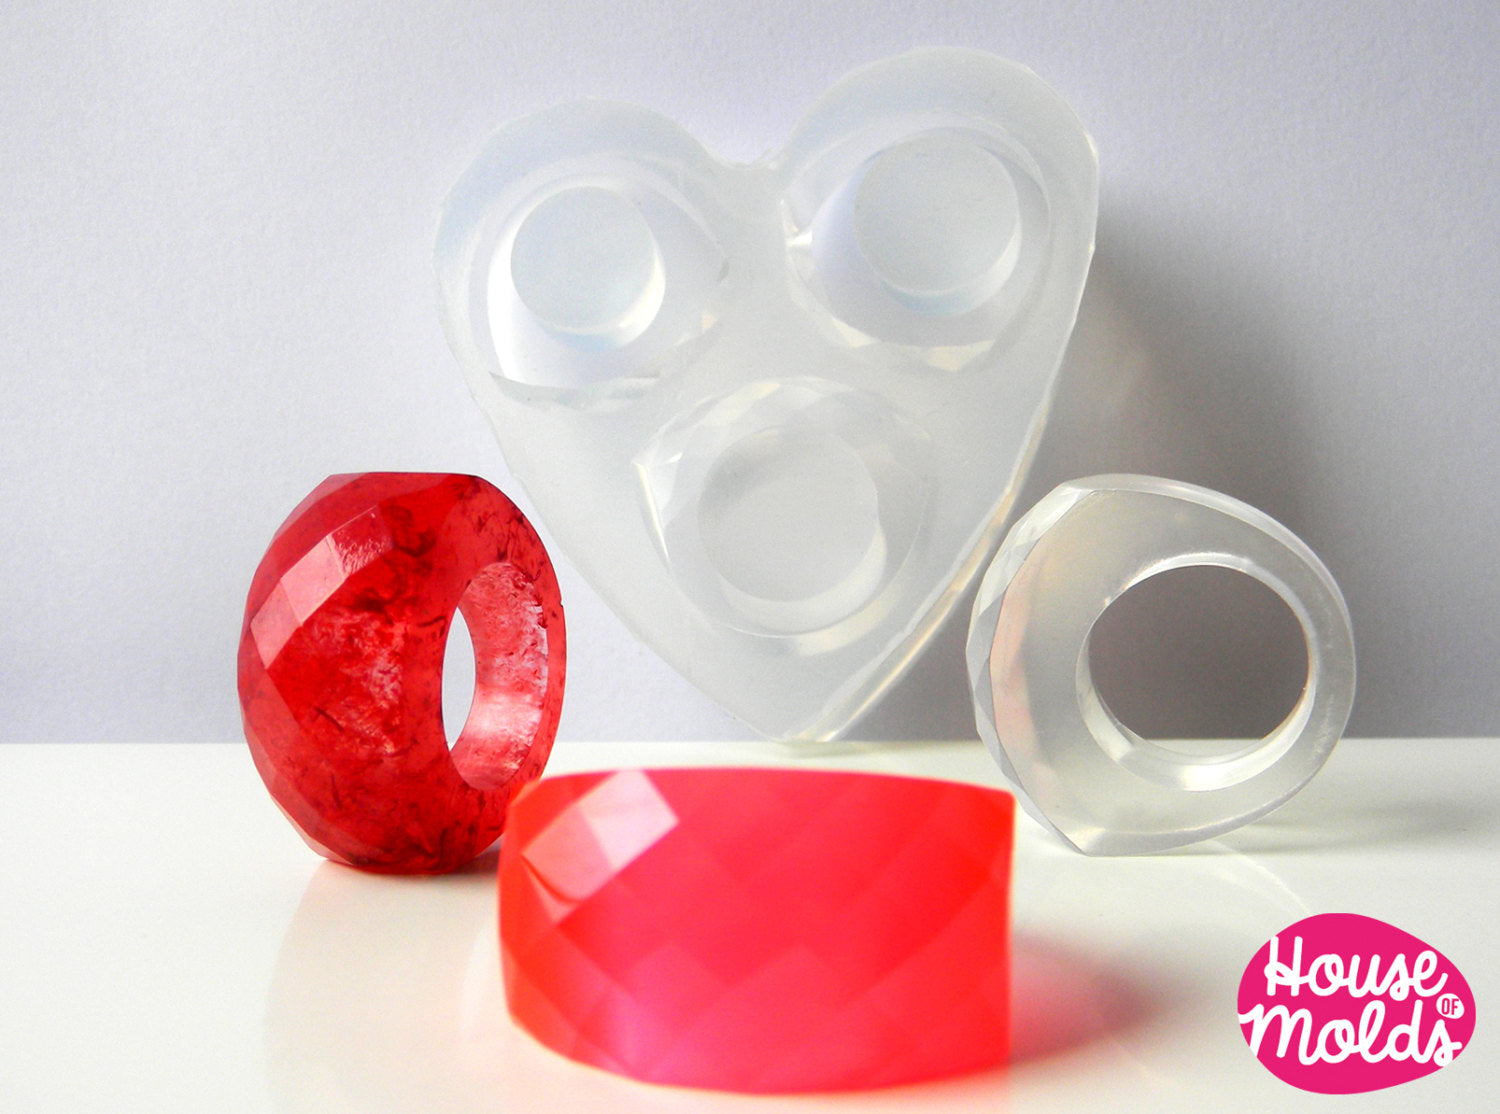 Chunky Resin Ring Mold, 3 Sizes